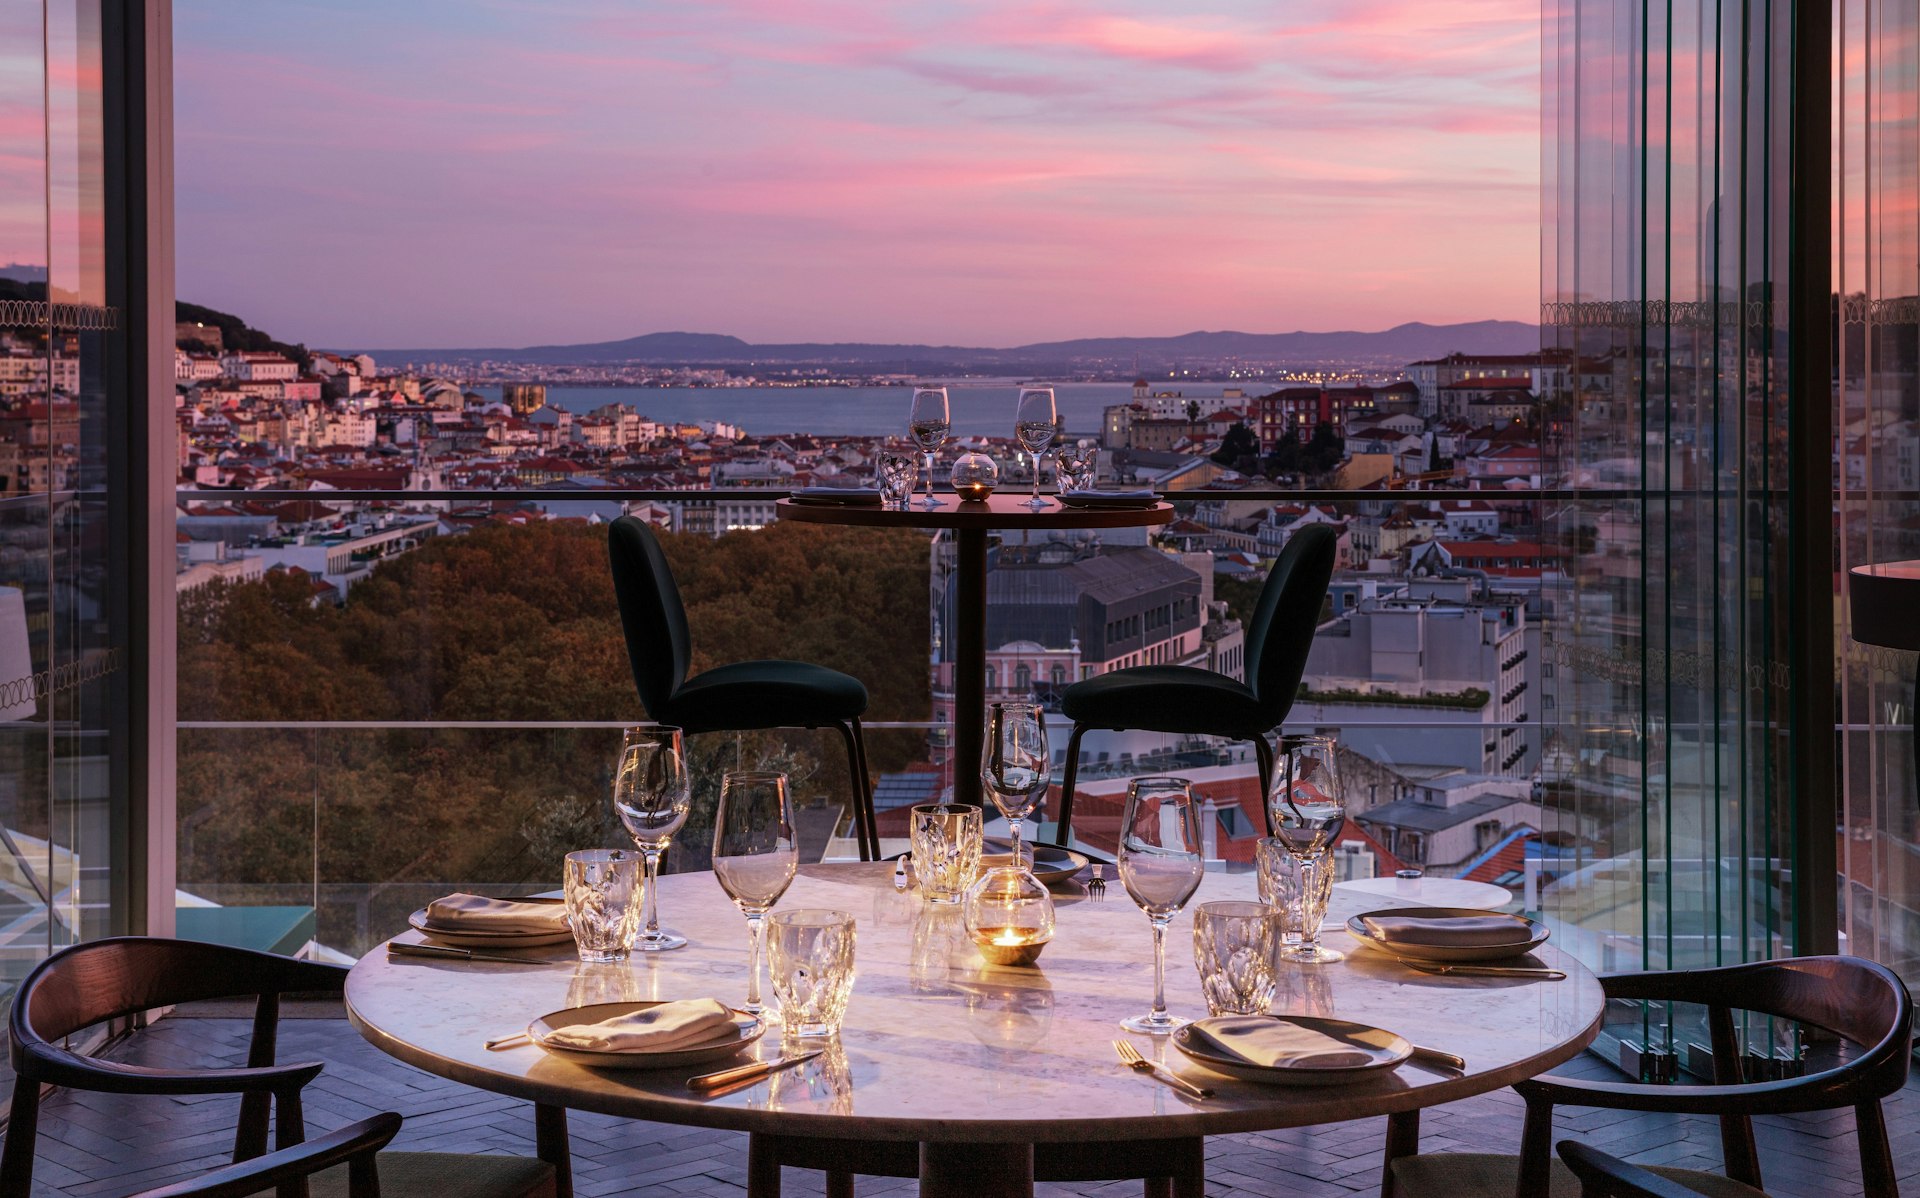 A table set next to a balcony with a view stretching over a city towards a river at dusk